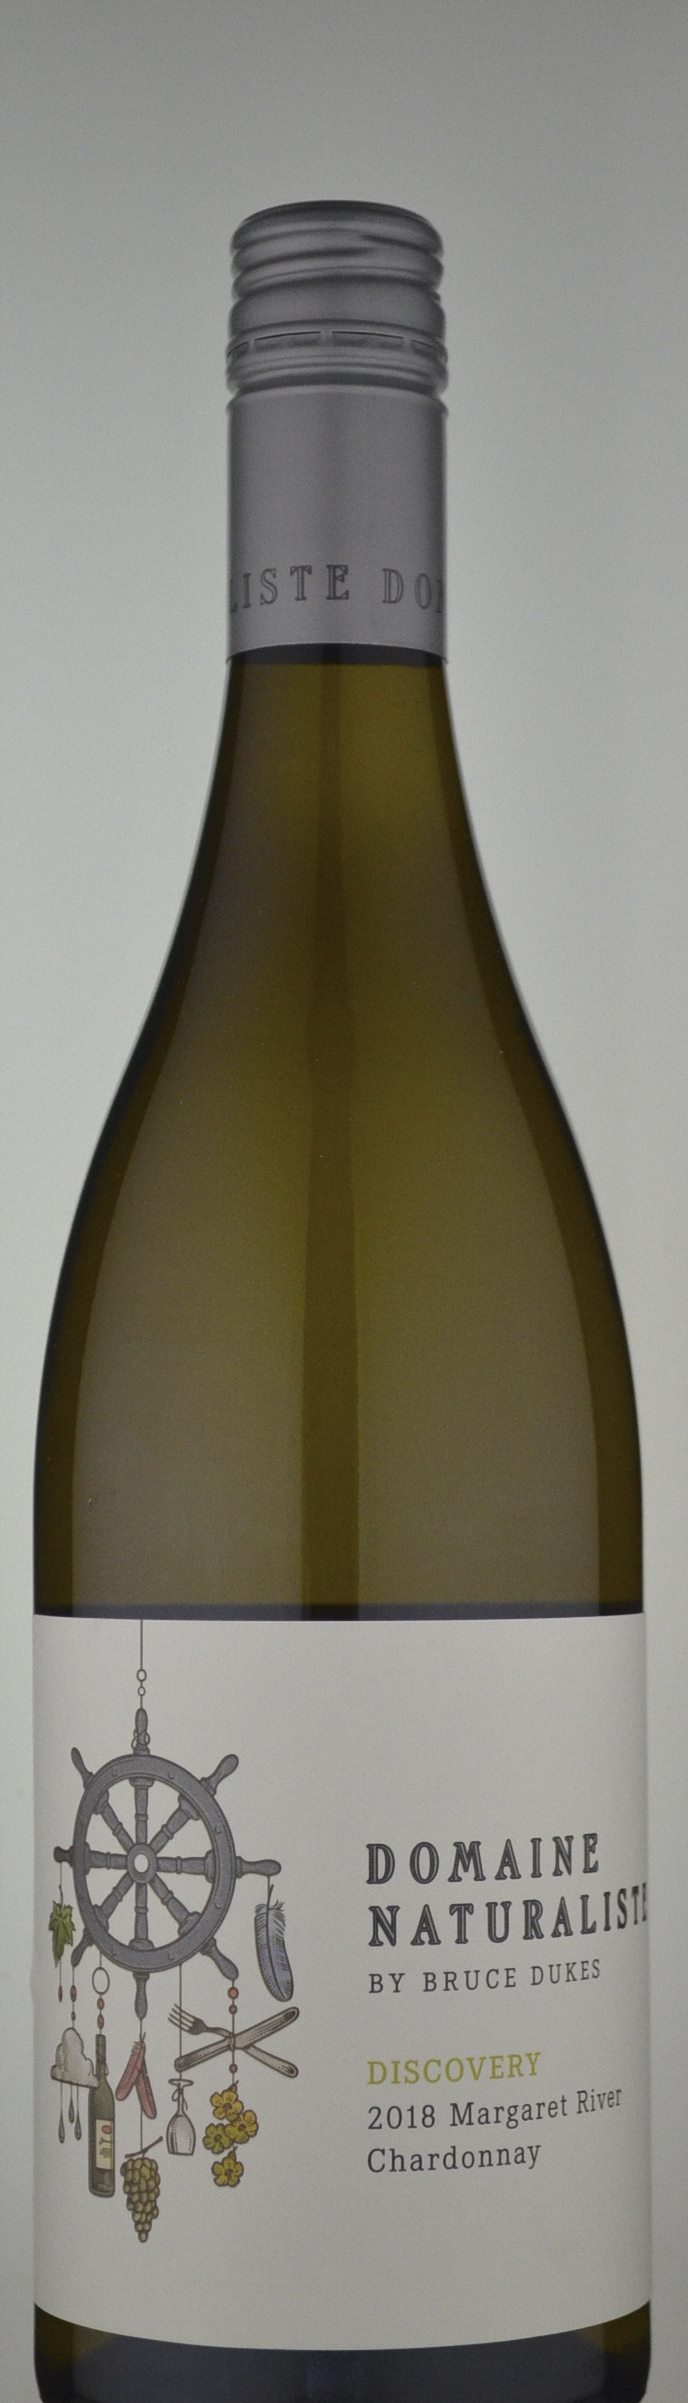 Domaine Naturaliste Discovery Chardonnay 2018